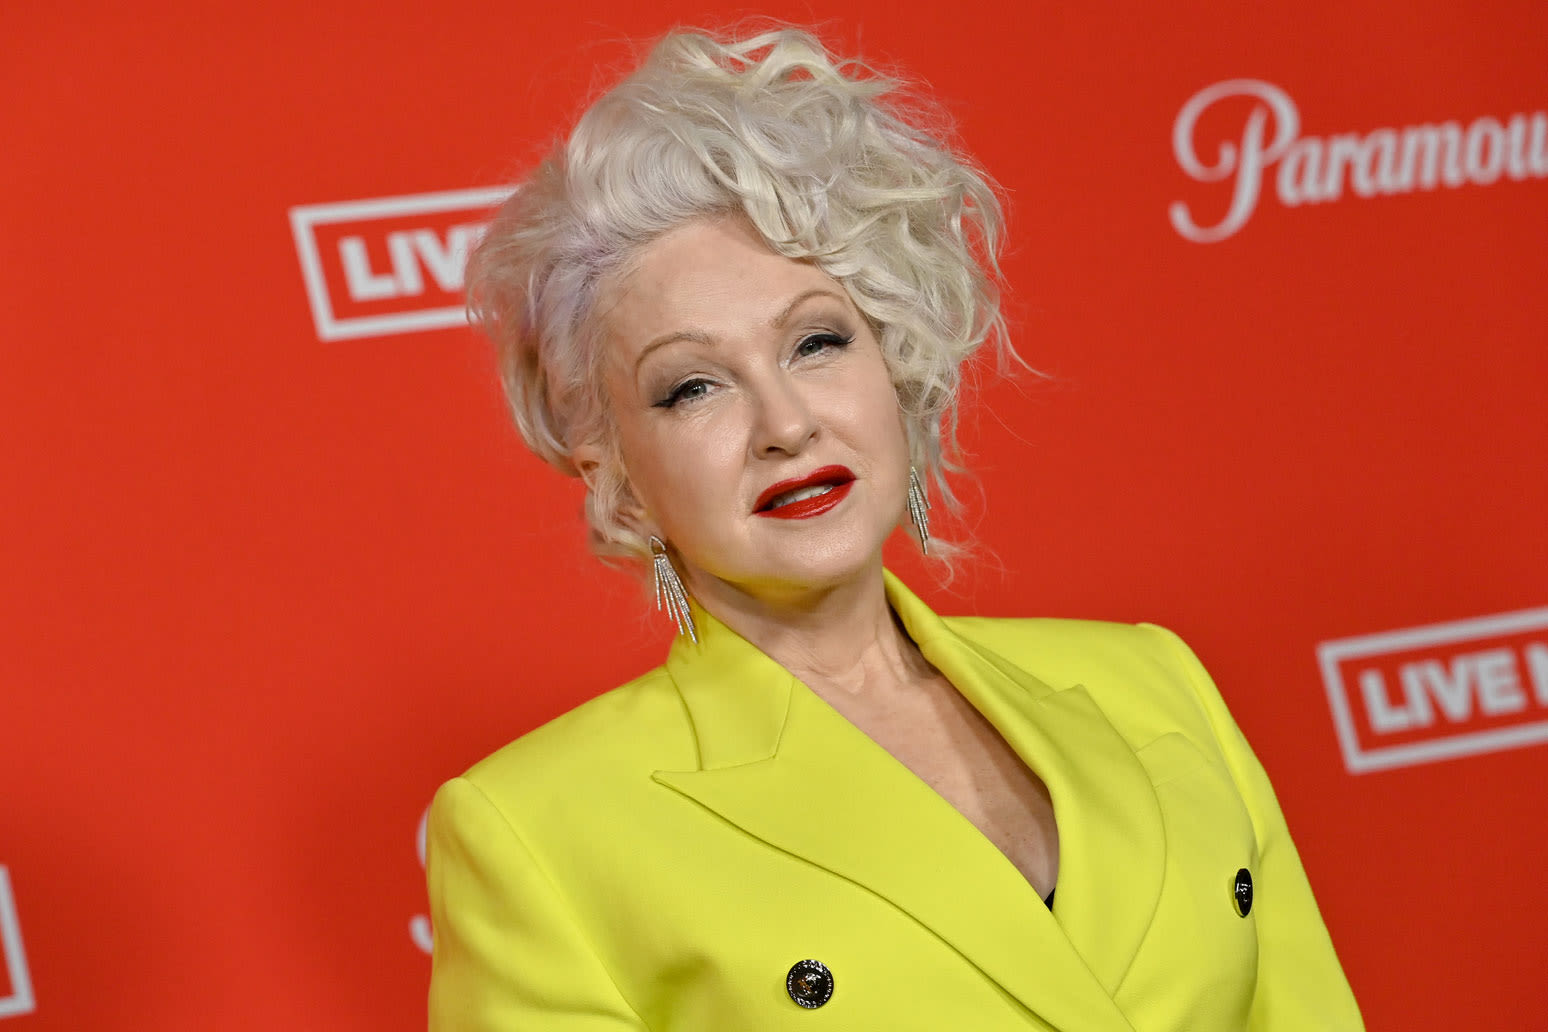 How to Get Tickets to Cyndi Lauper’s ‘Girls Just Wanna Have Fun’ Farewell Tour